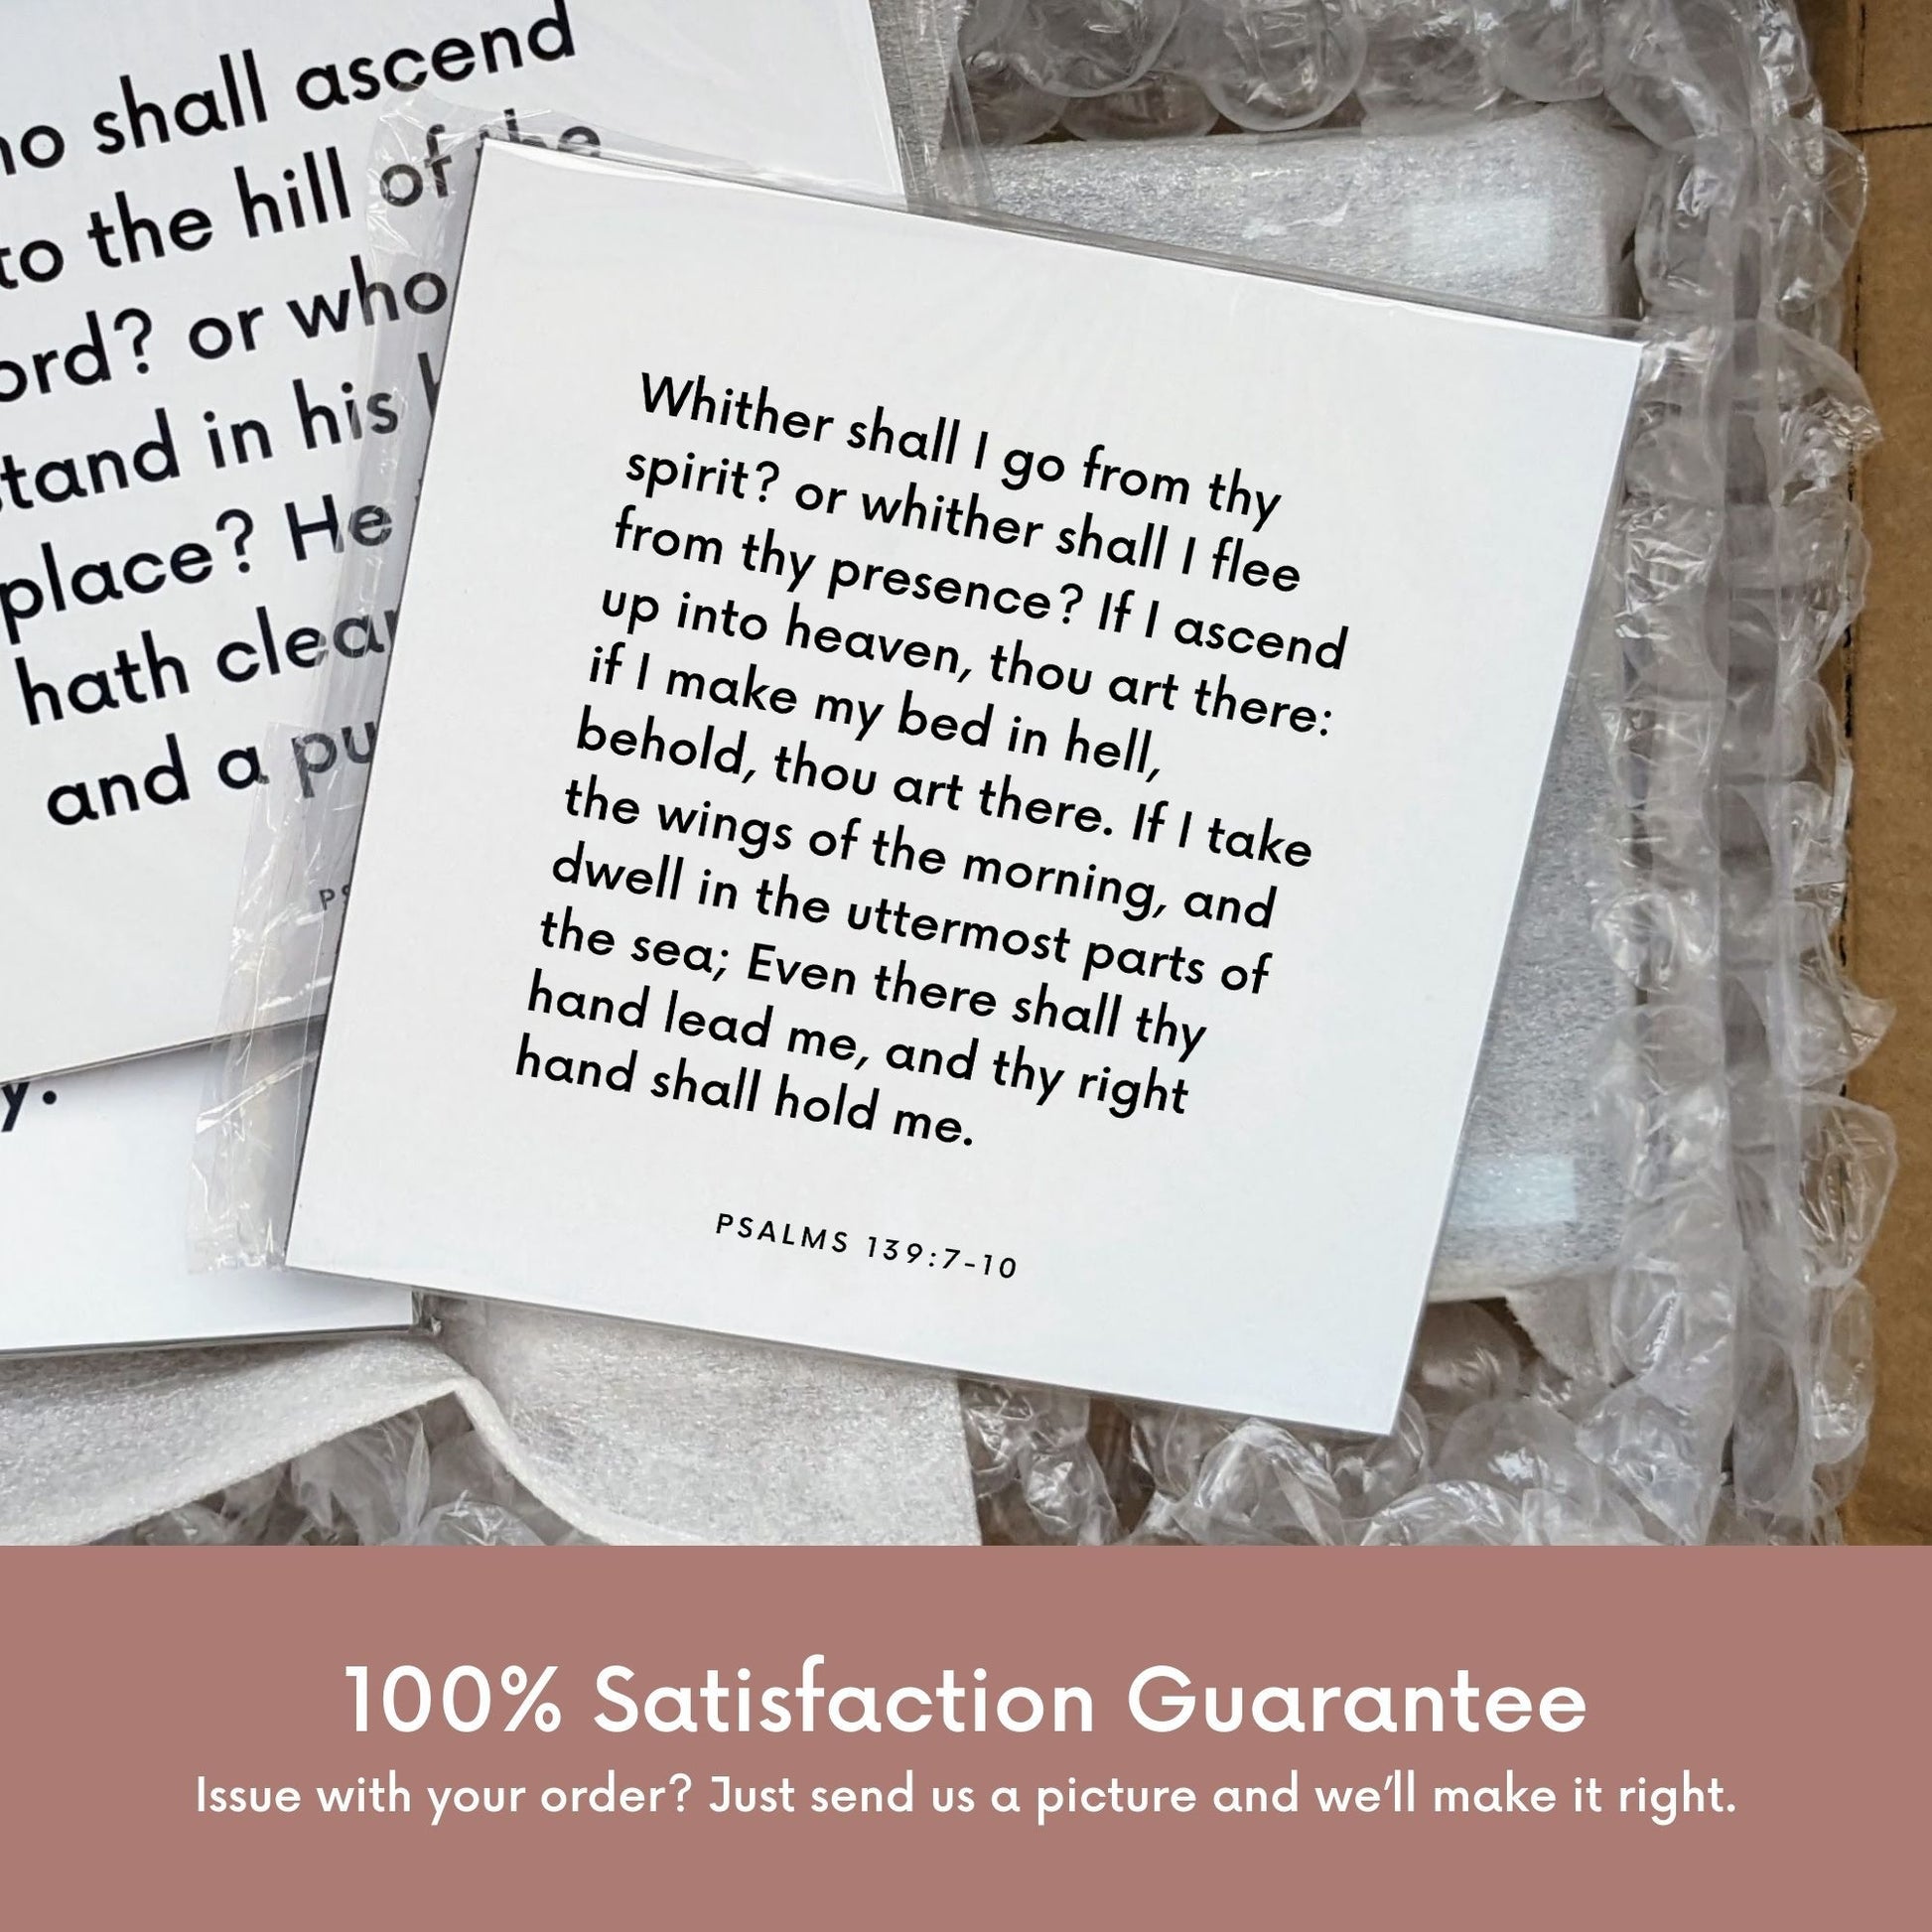 Shipping materials for scripture tile of Psalms 139:7-10 - "If I ascend up into heaven, thou art there"